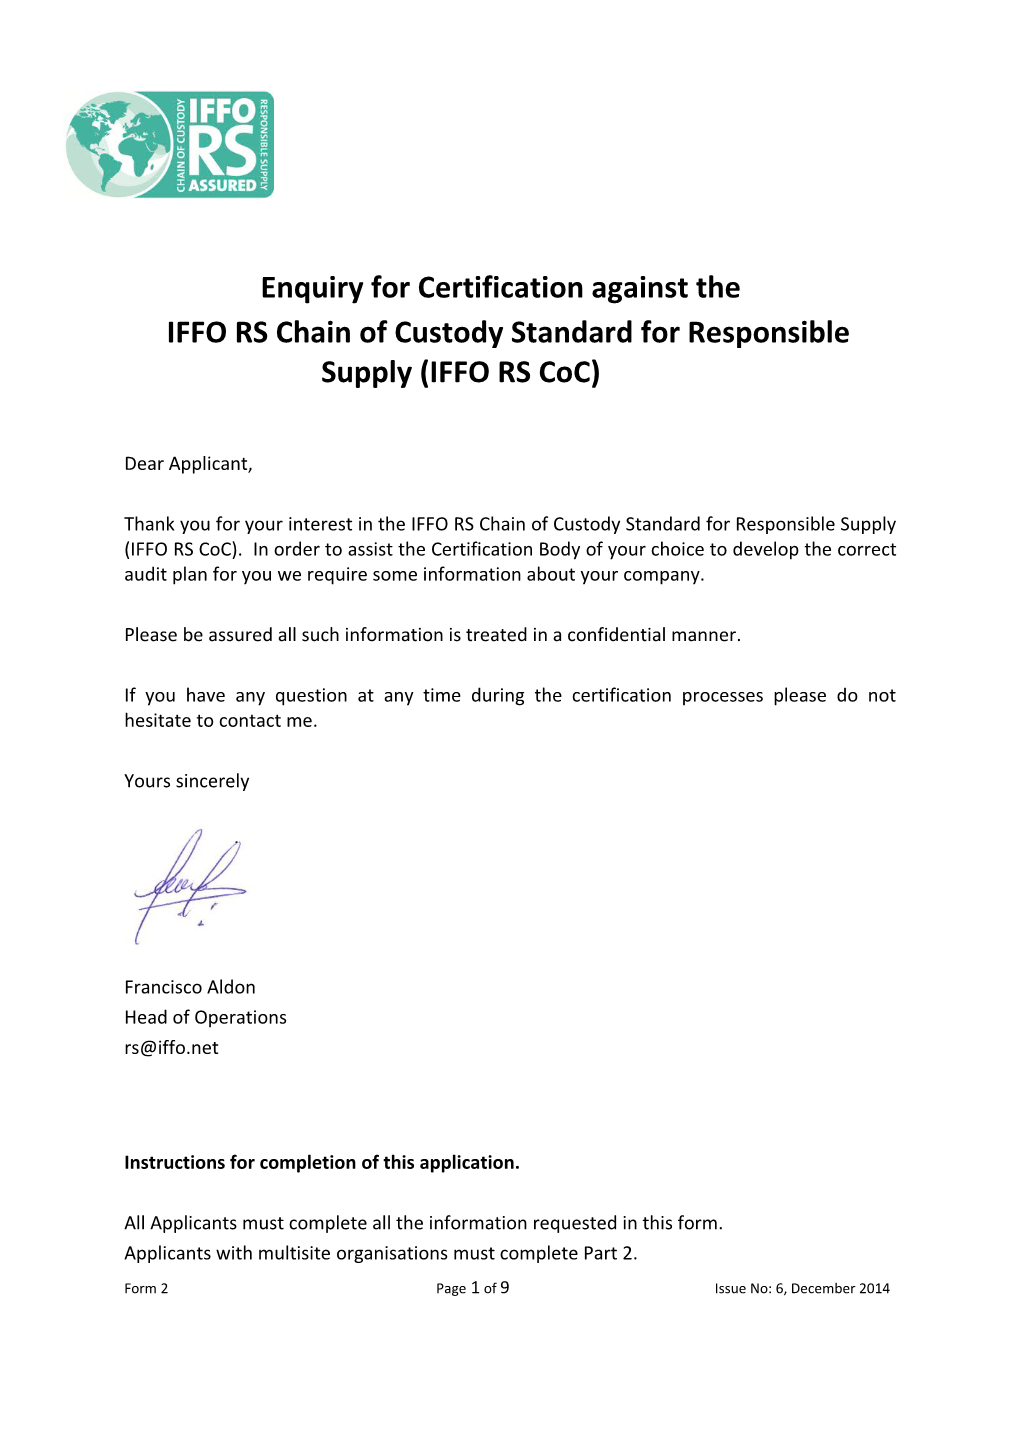 Enquiry for Certification Against The